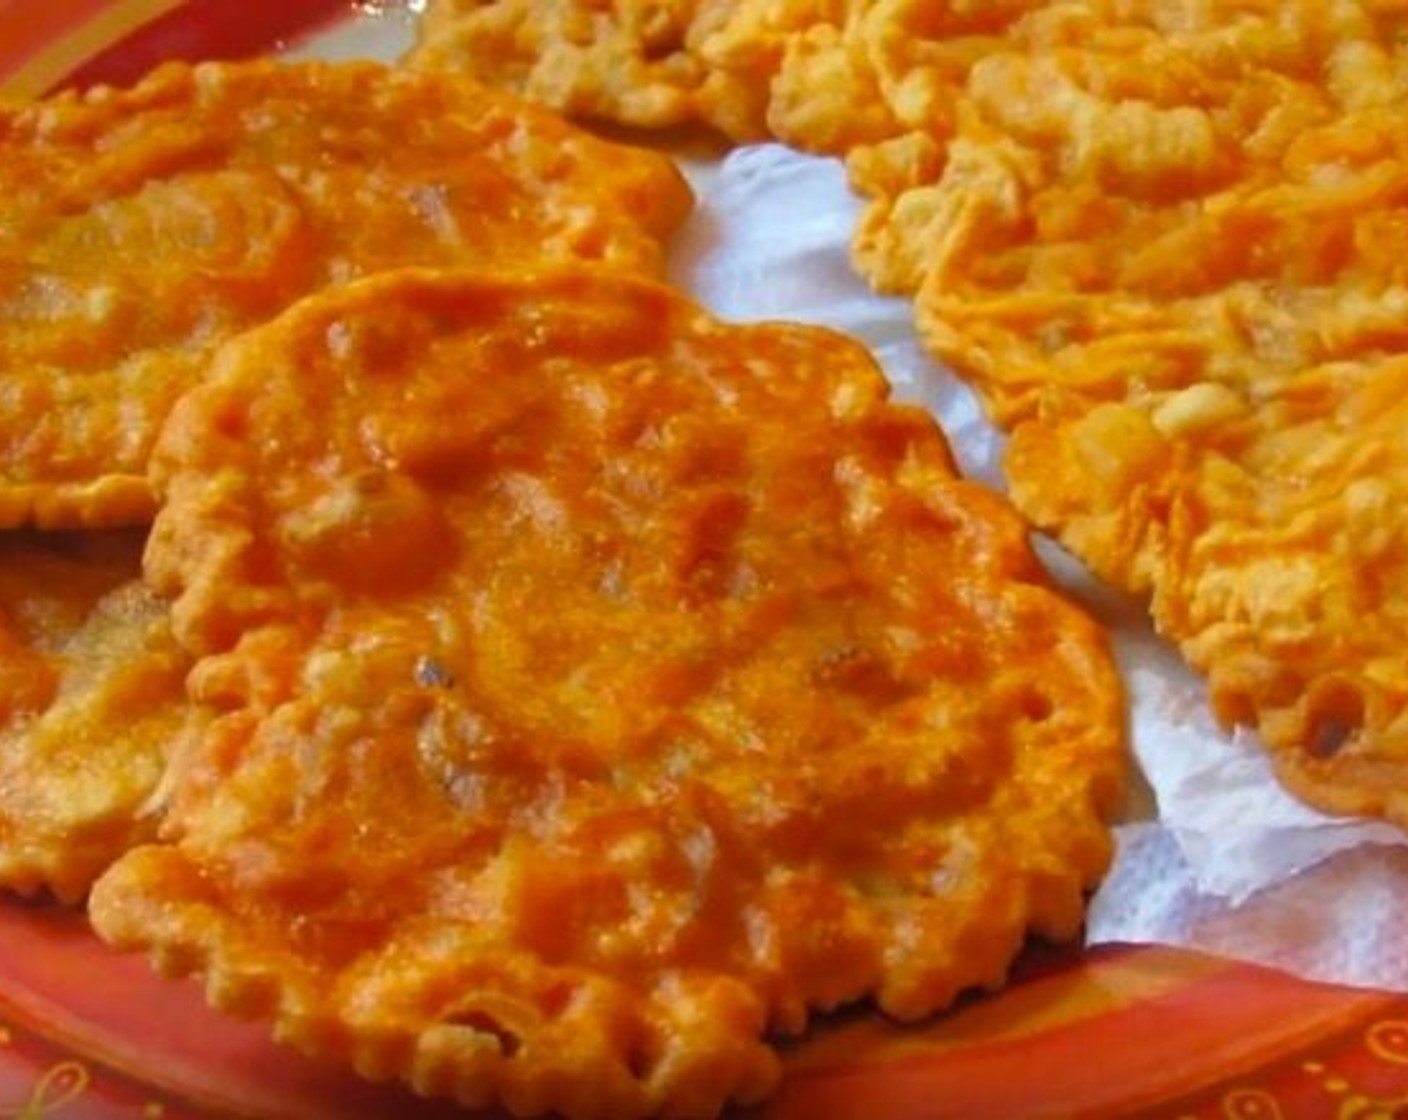 Authentic Bacalaitos (Fried Fish Patties)